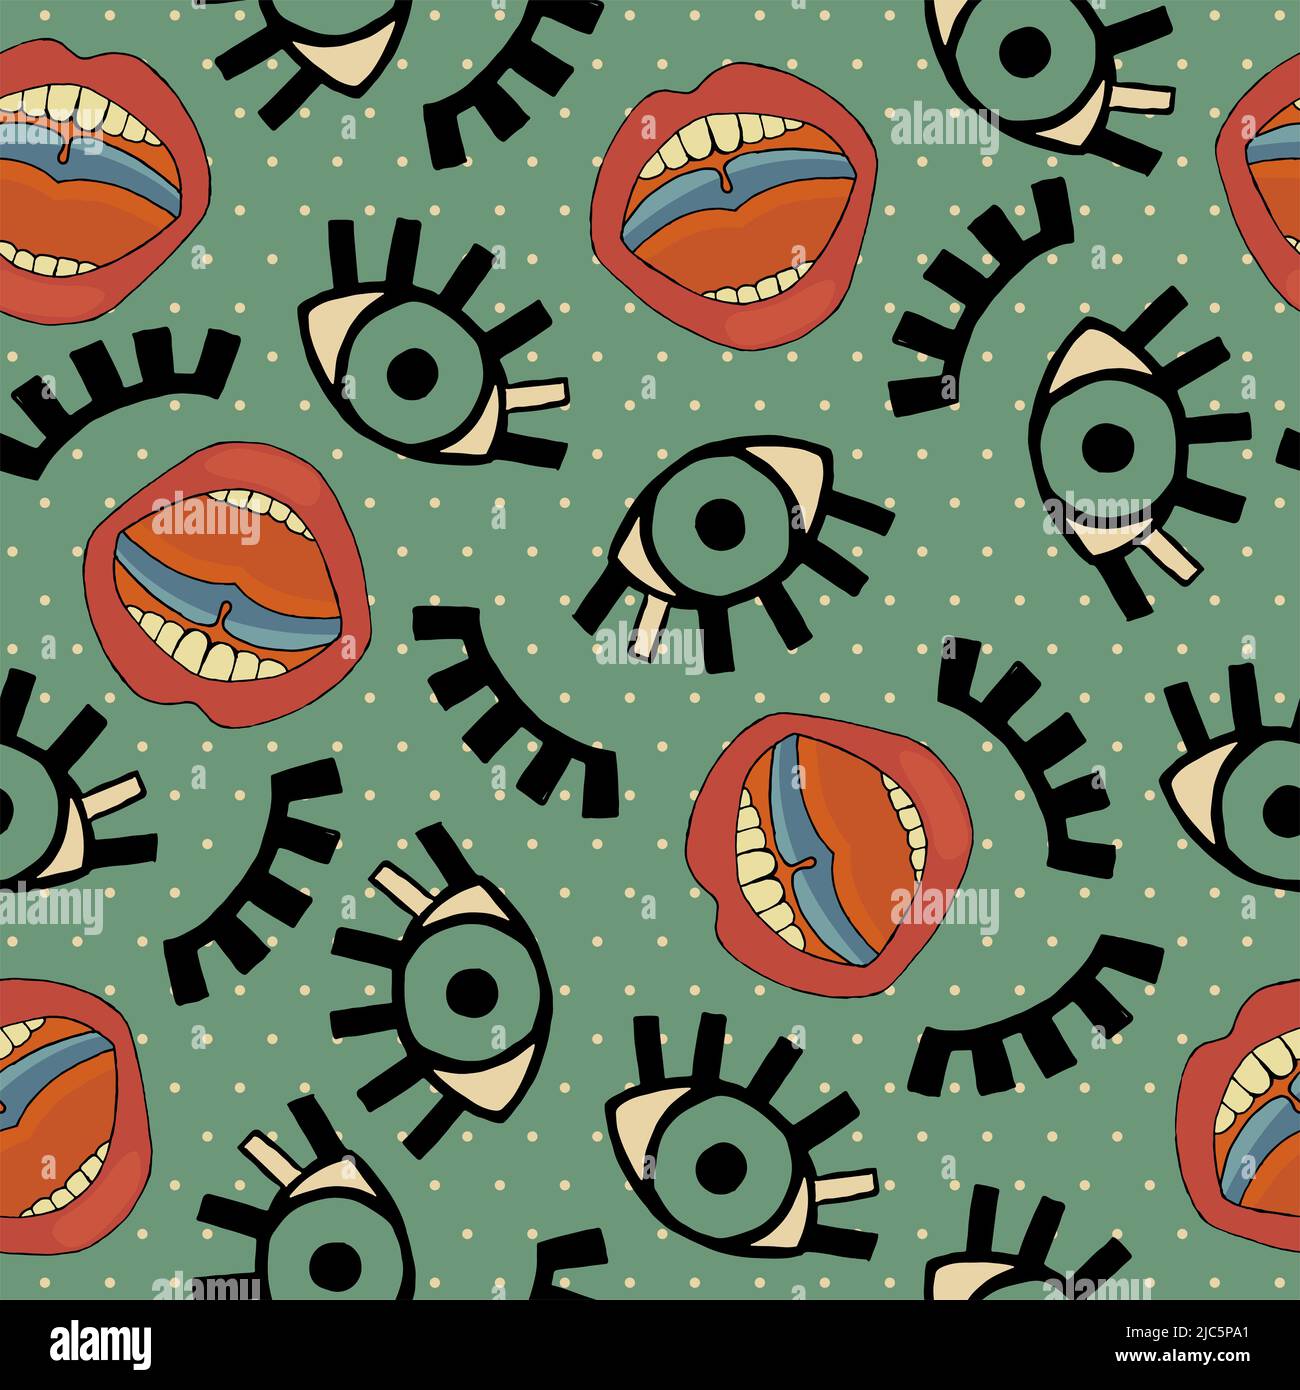 Seamless pattern with Pop Art elements of eyes and lips. Fashionable comic vector retro illustration Stock Photo